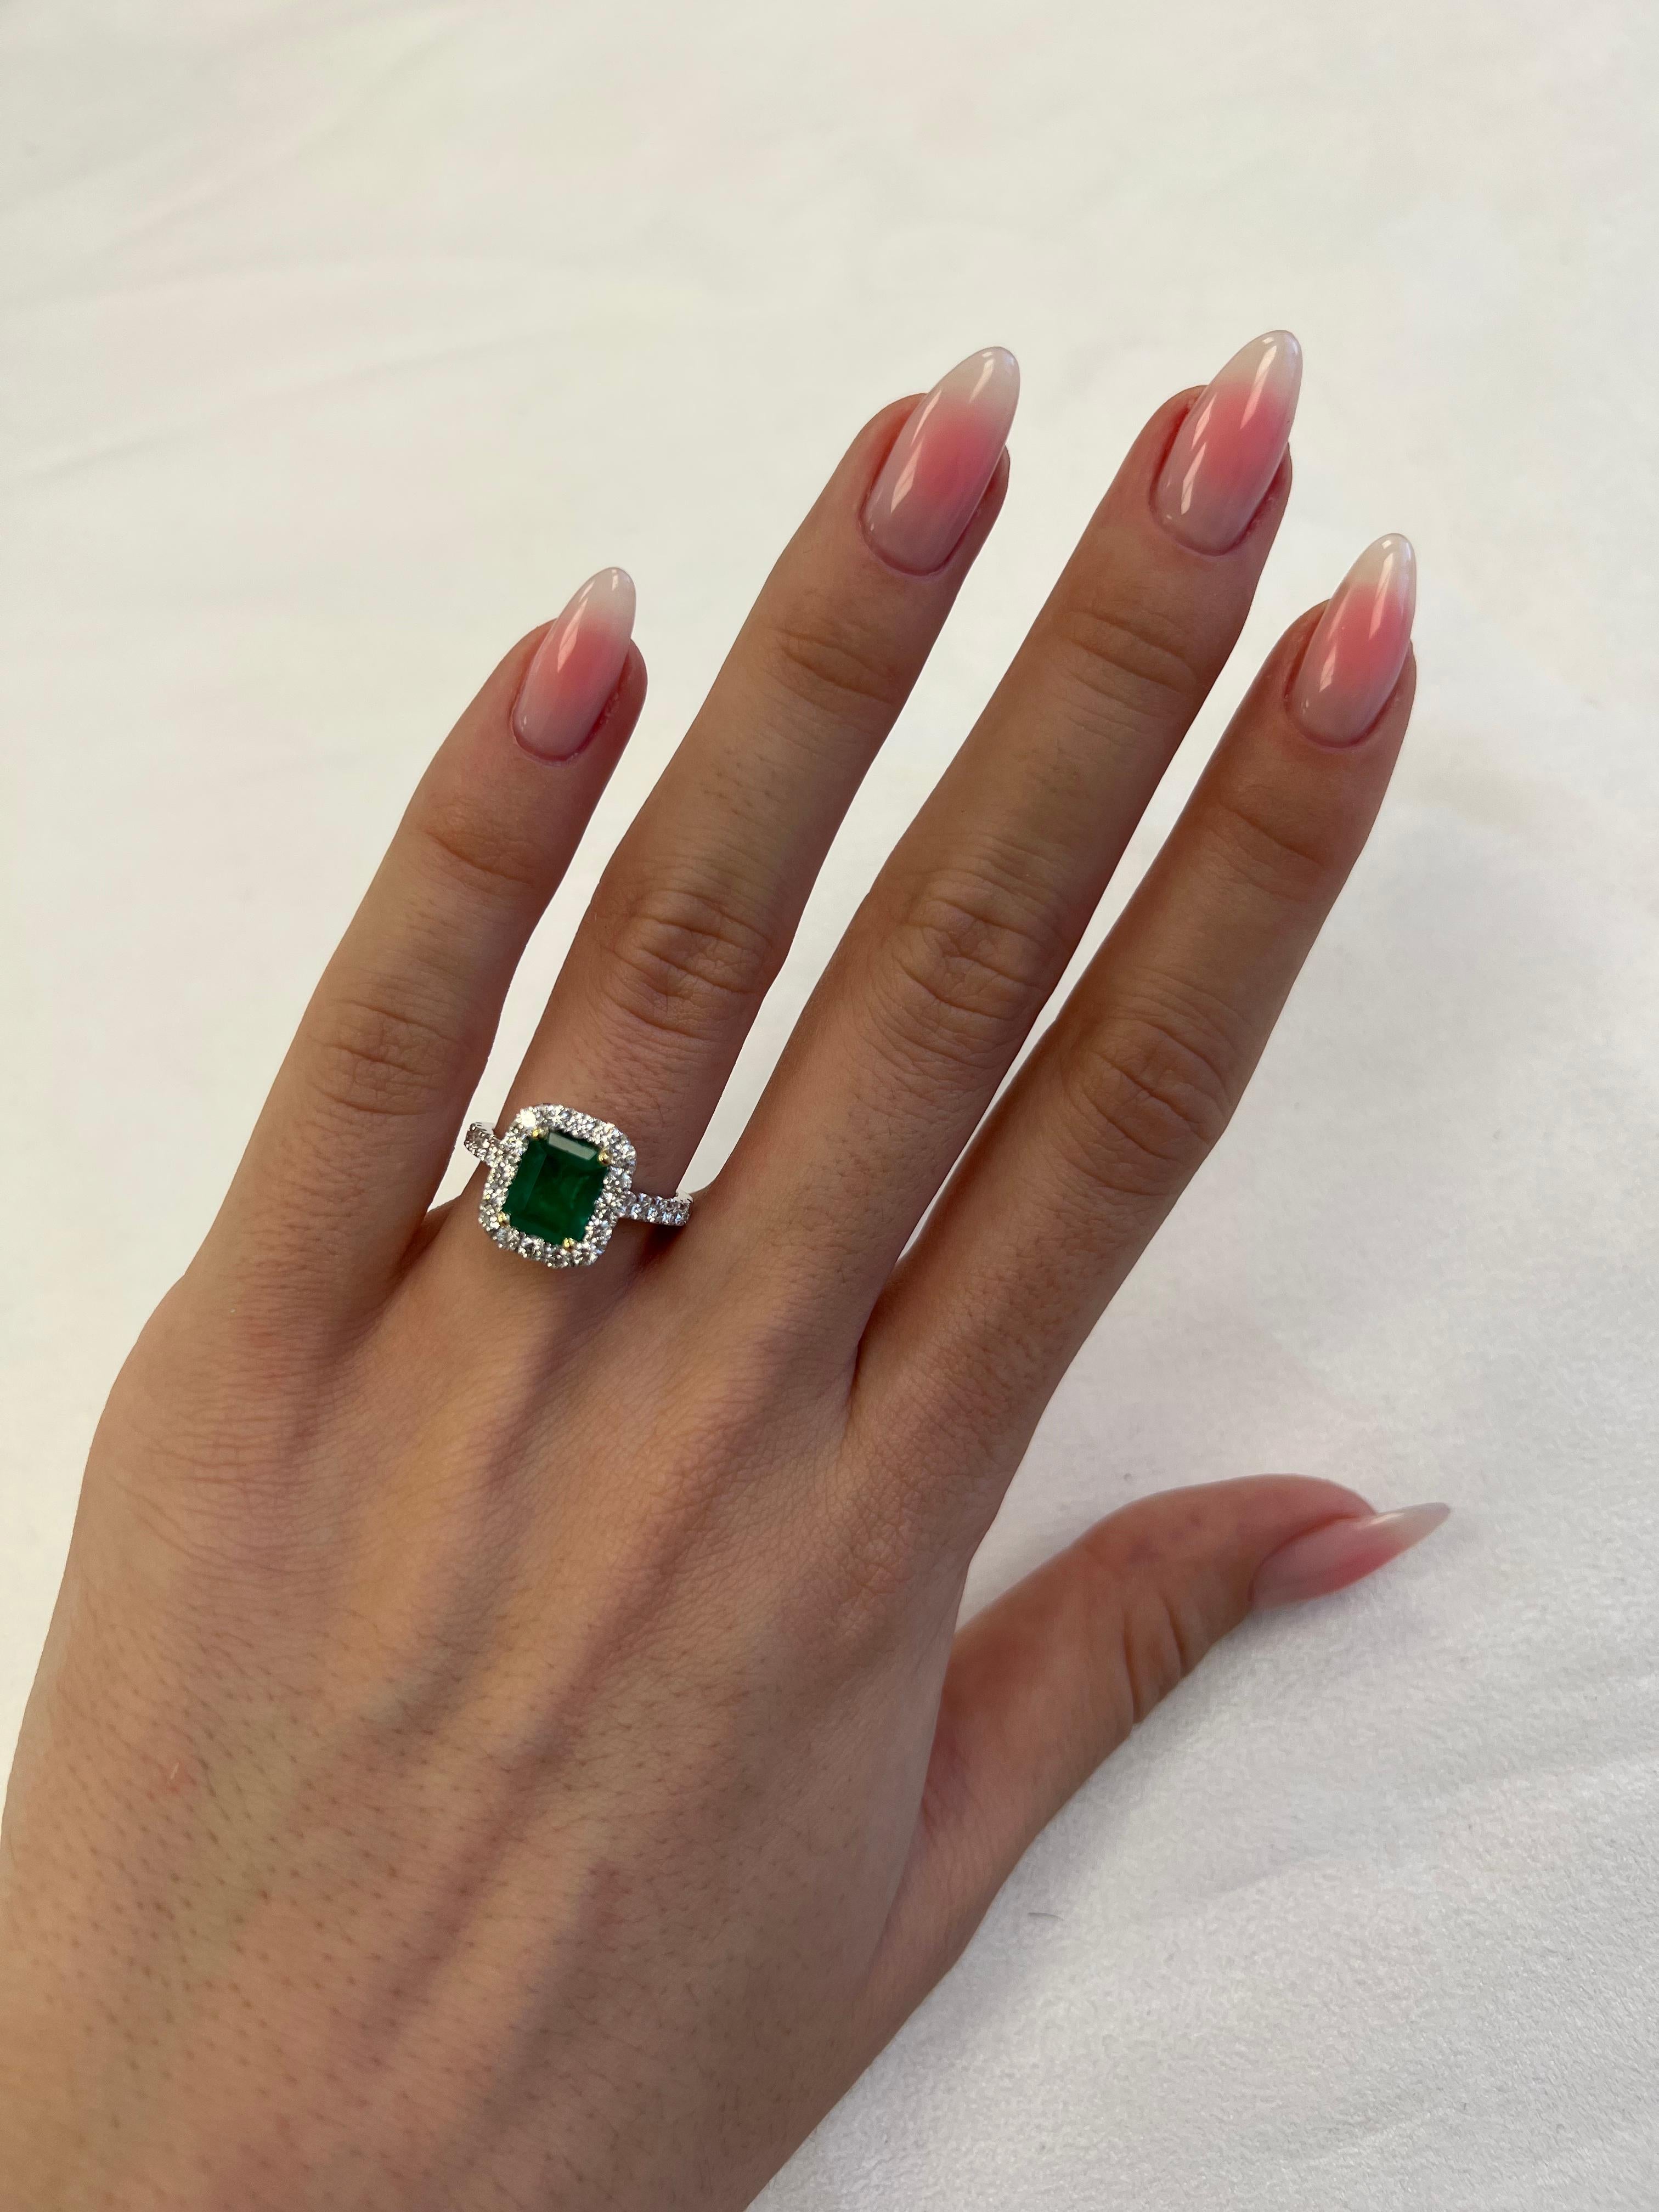 Classic emerald and diamond halo ring, GIA certified. 
2.98 carats total gemstone weight.
1.96 carat emerald cut emerald, F2, GIA certified. Complimented by 28 round brilliant diamonds, 1.02 carats, F/G color and VS clarity. 18k white and yellow